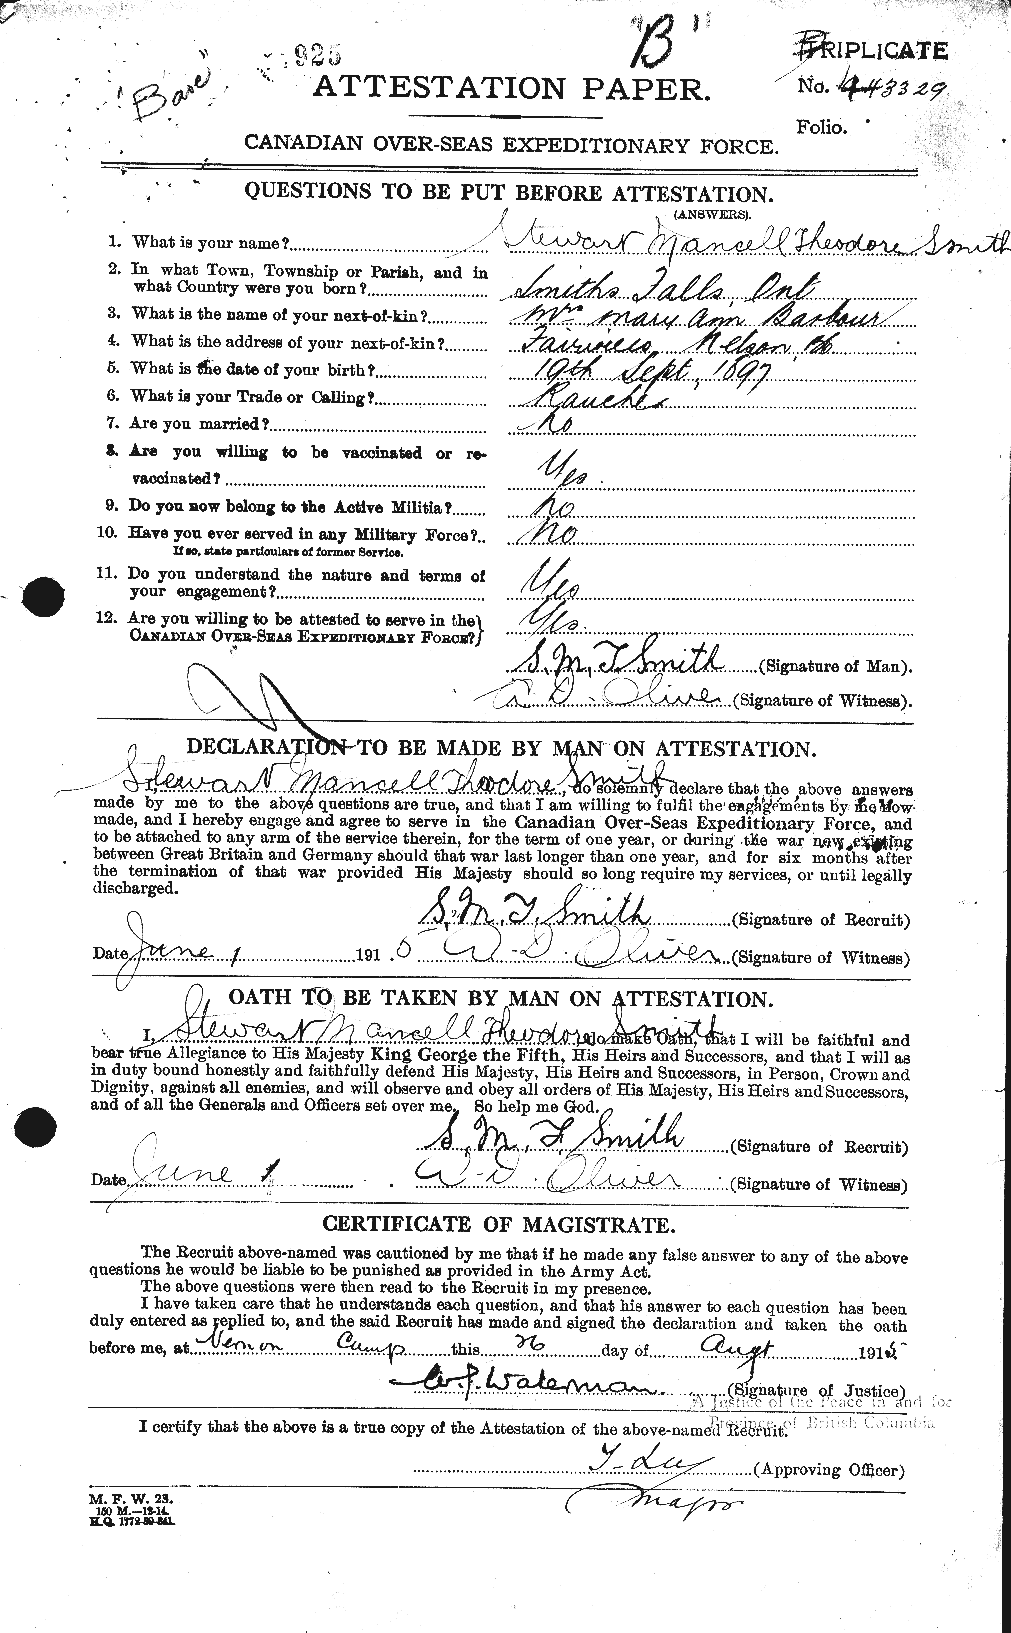 Personnel Records of the First World War - CEF 107355a